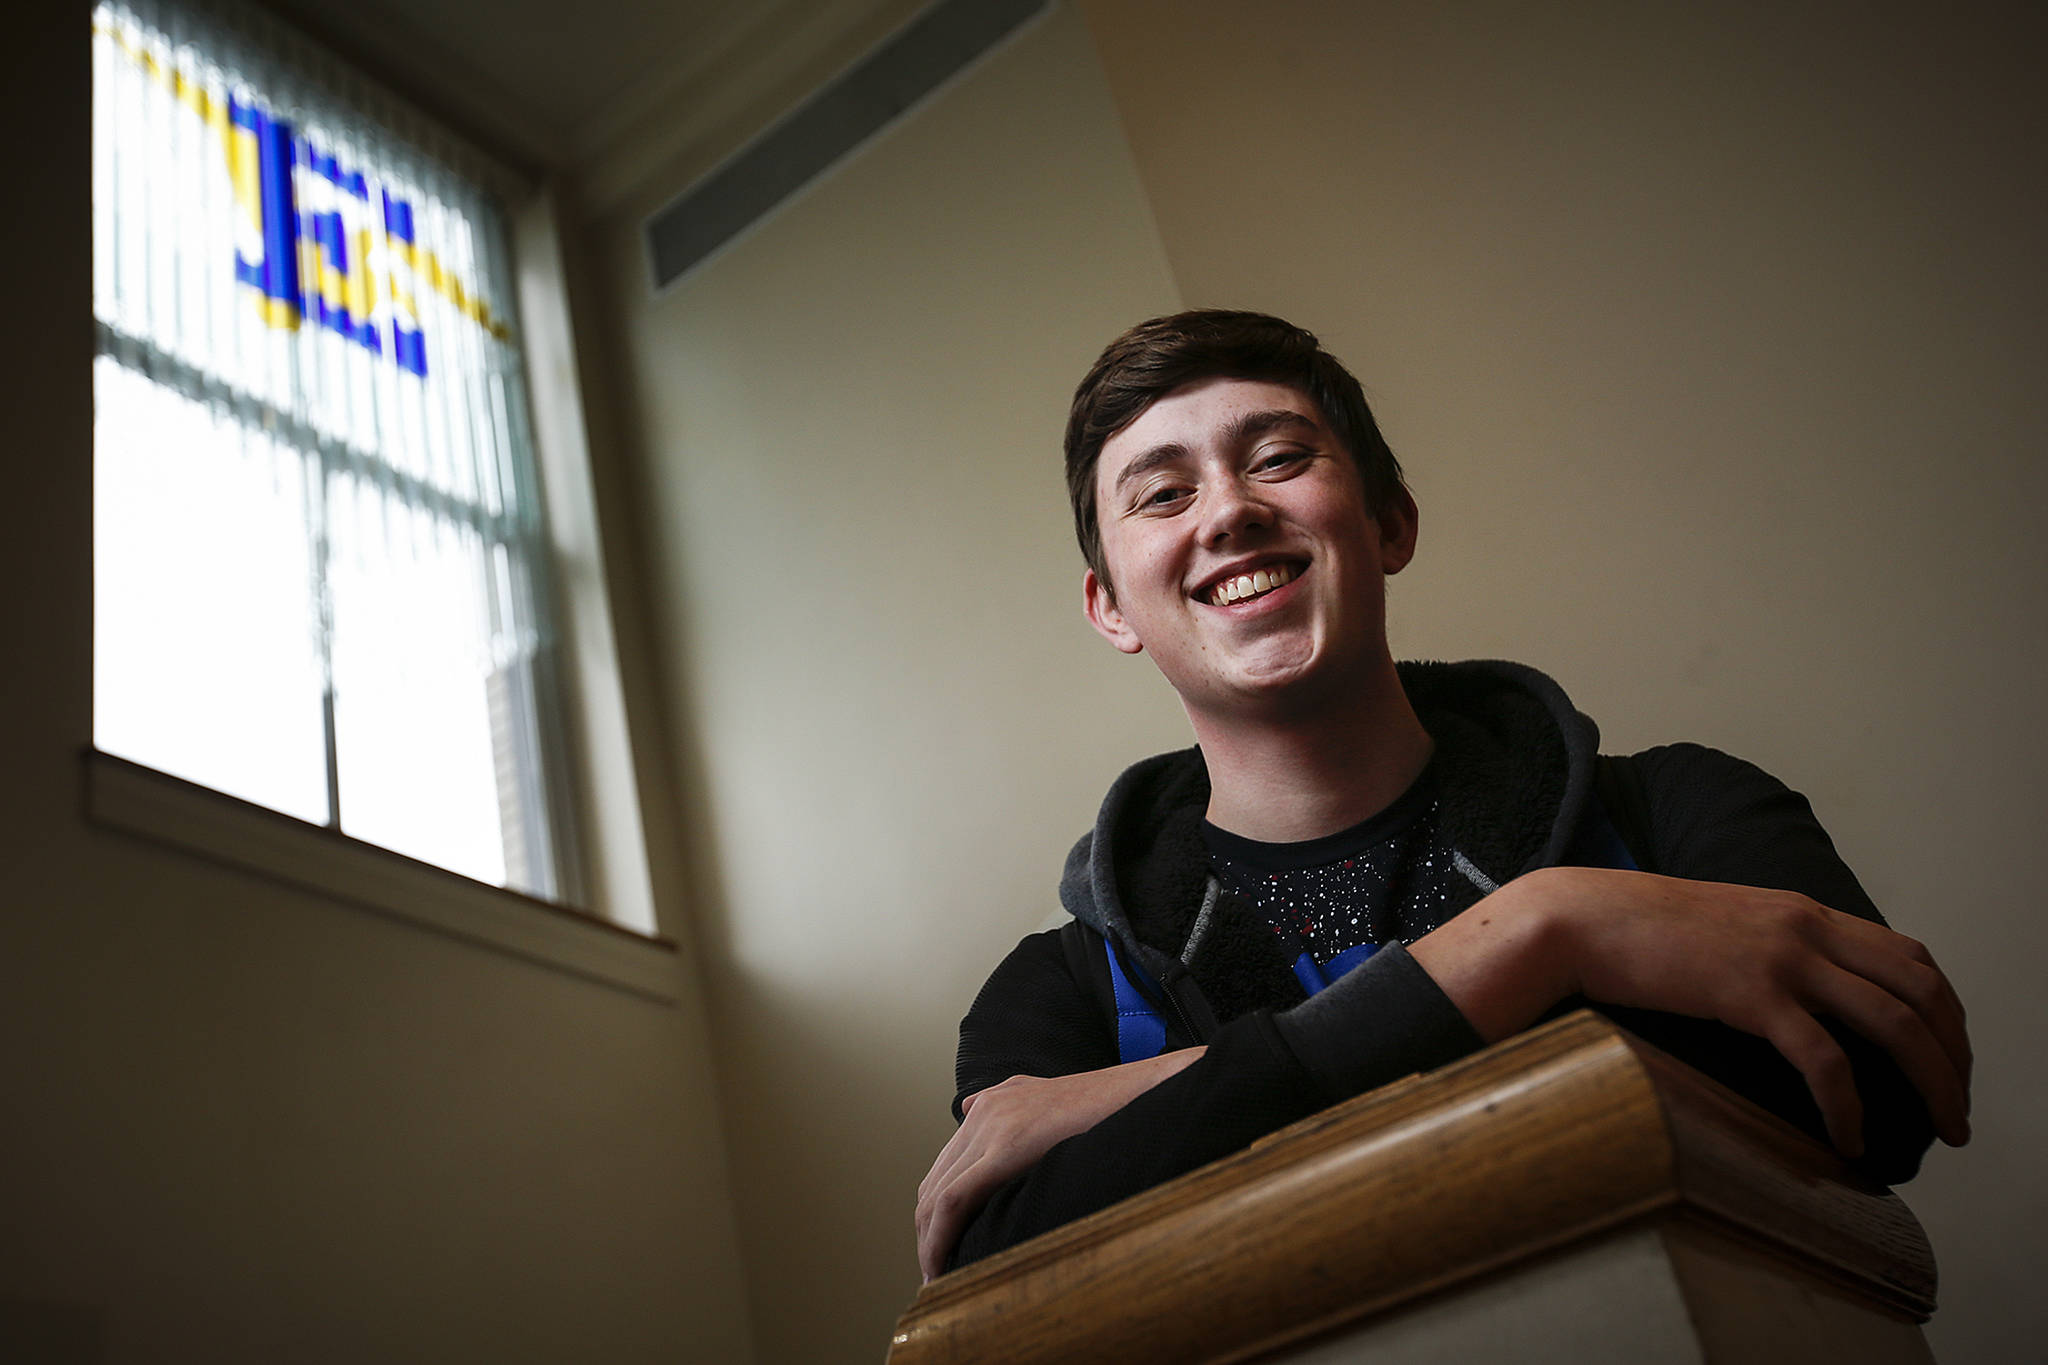 Everett High School senior Nate Ness is involved in his school’s drama club and is interested in pursuing chemistry in college. (Ian Terry / The Herald)